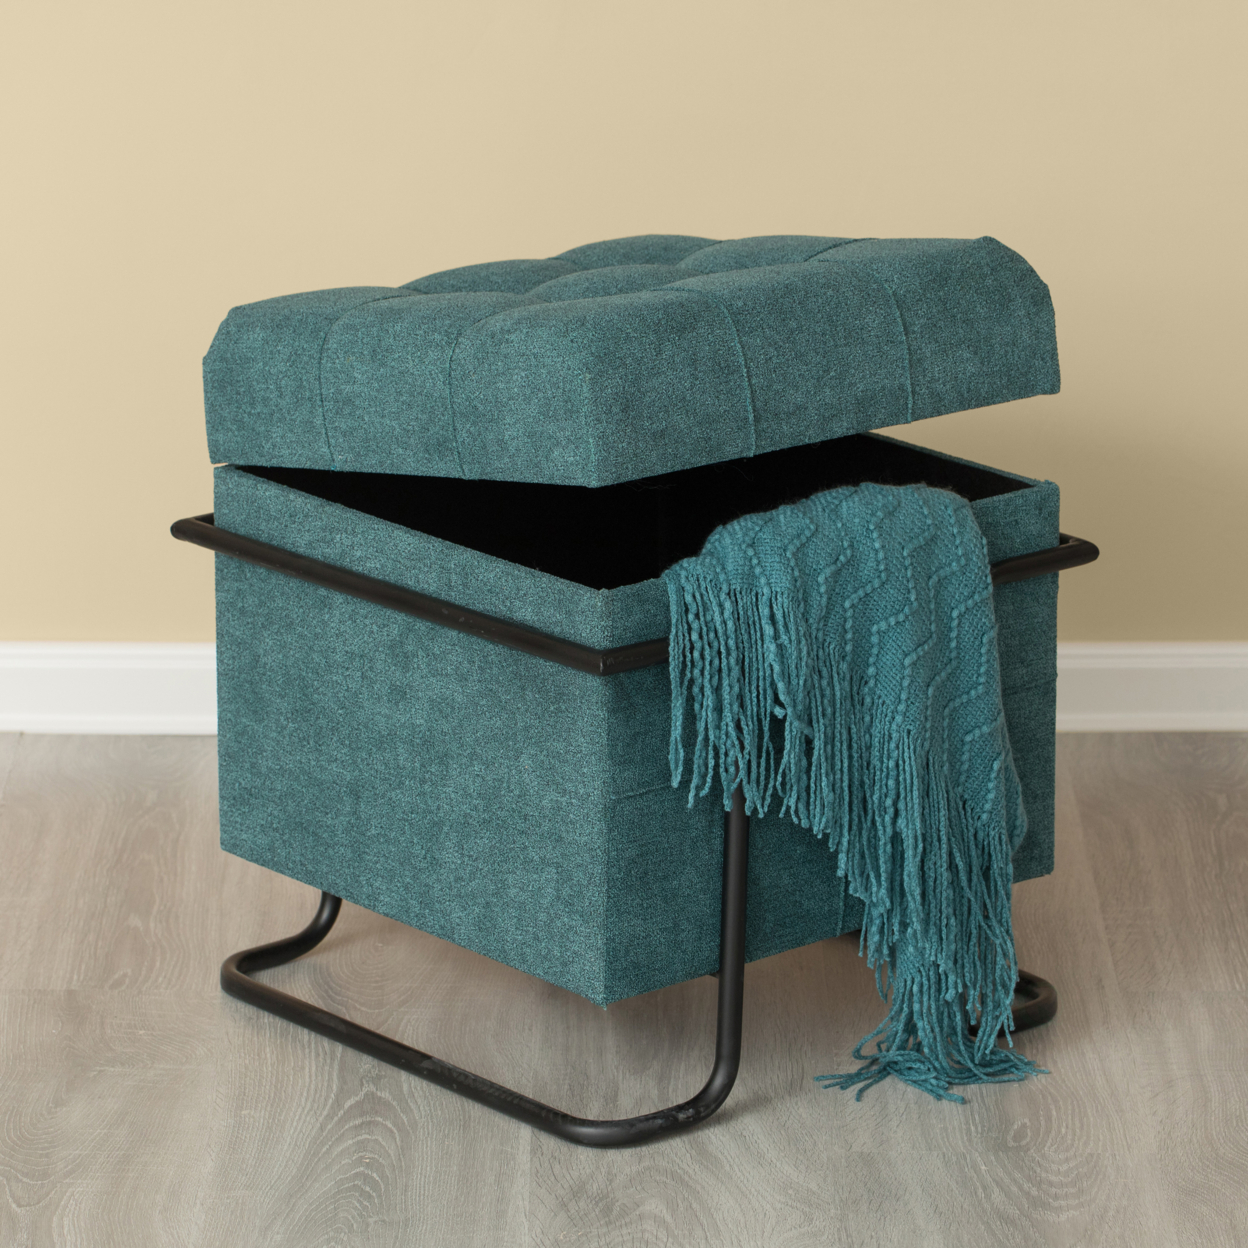 Square Fabric Storage Ottoman With Black Metal Frame - Brown